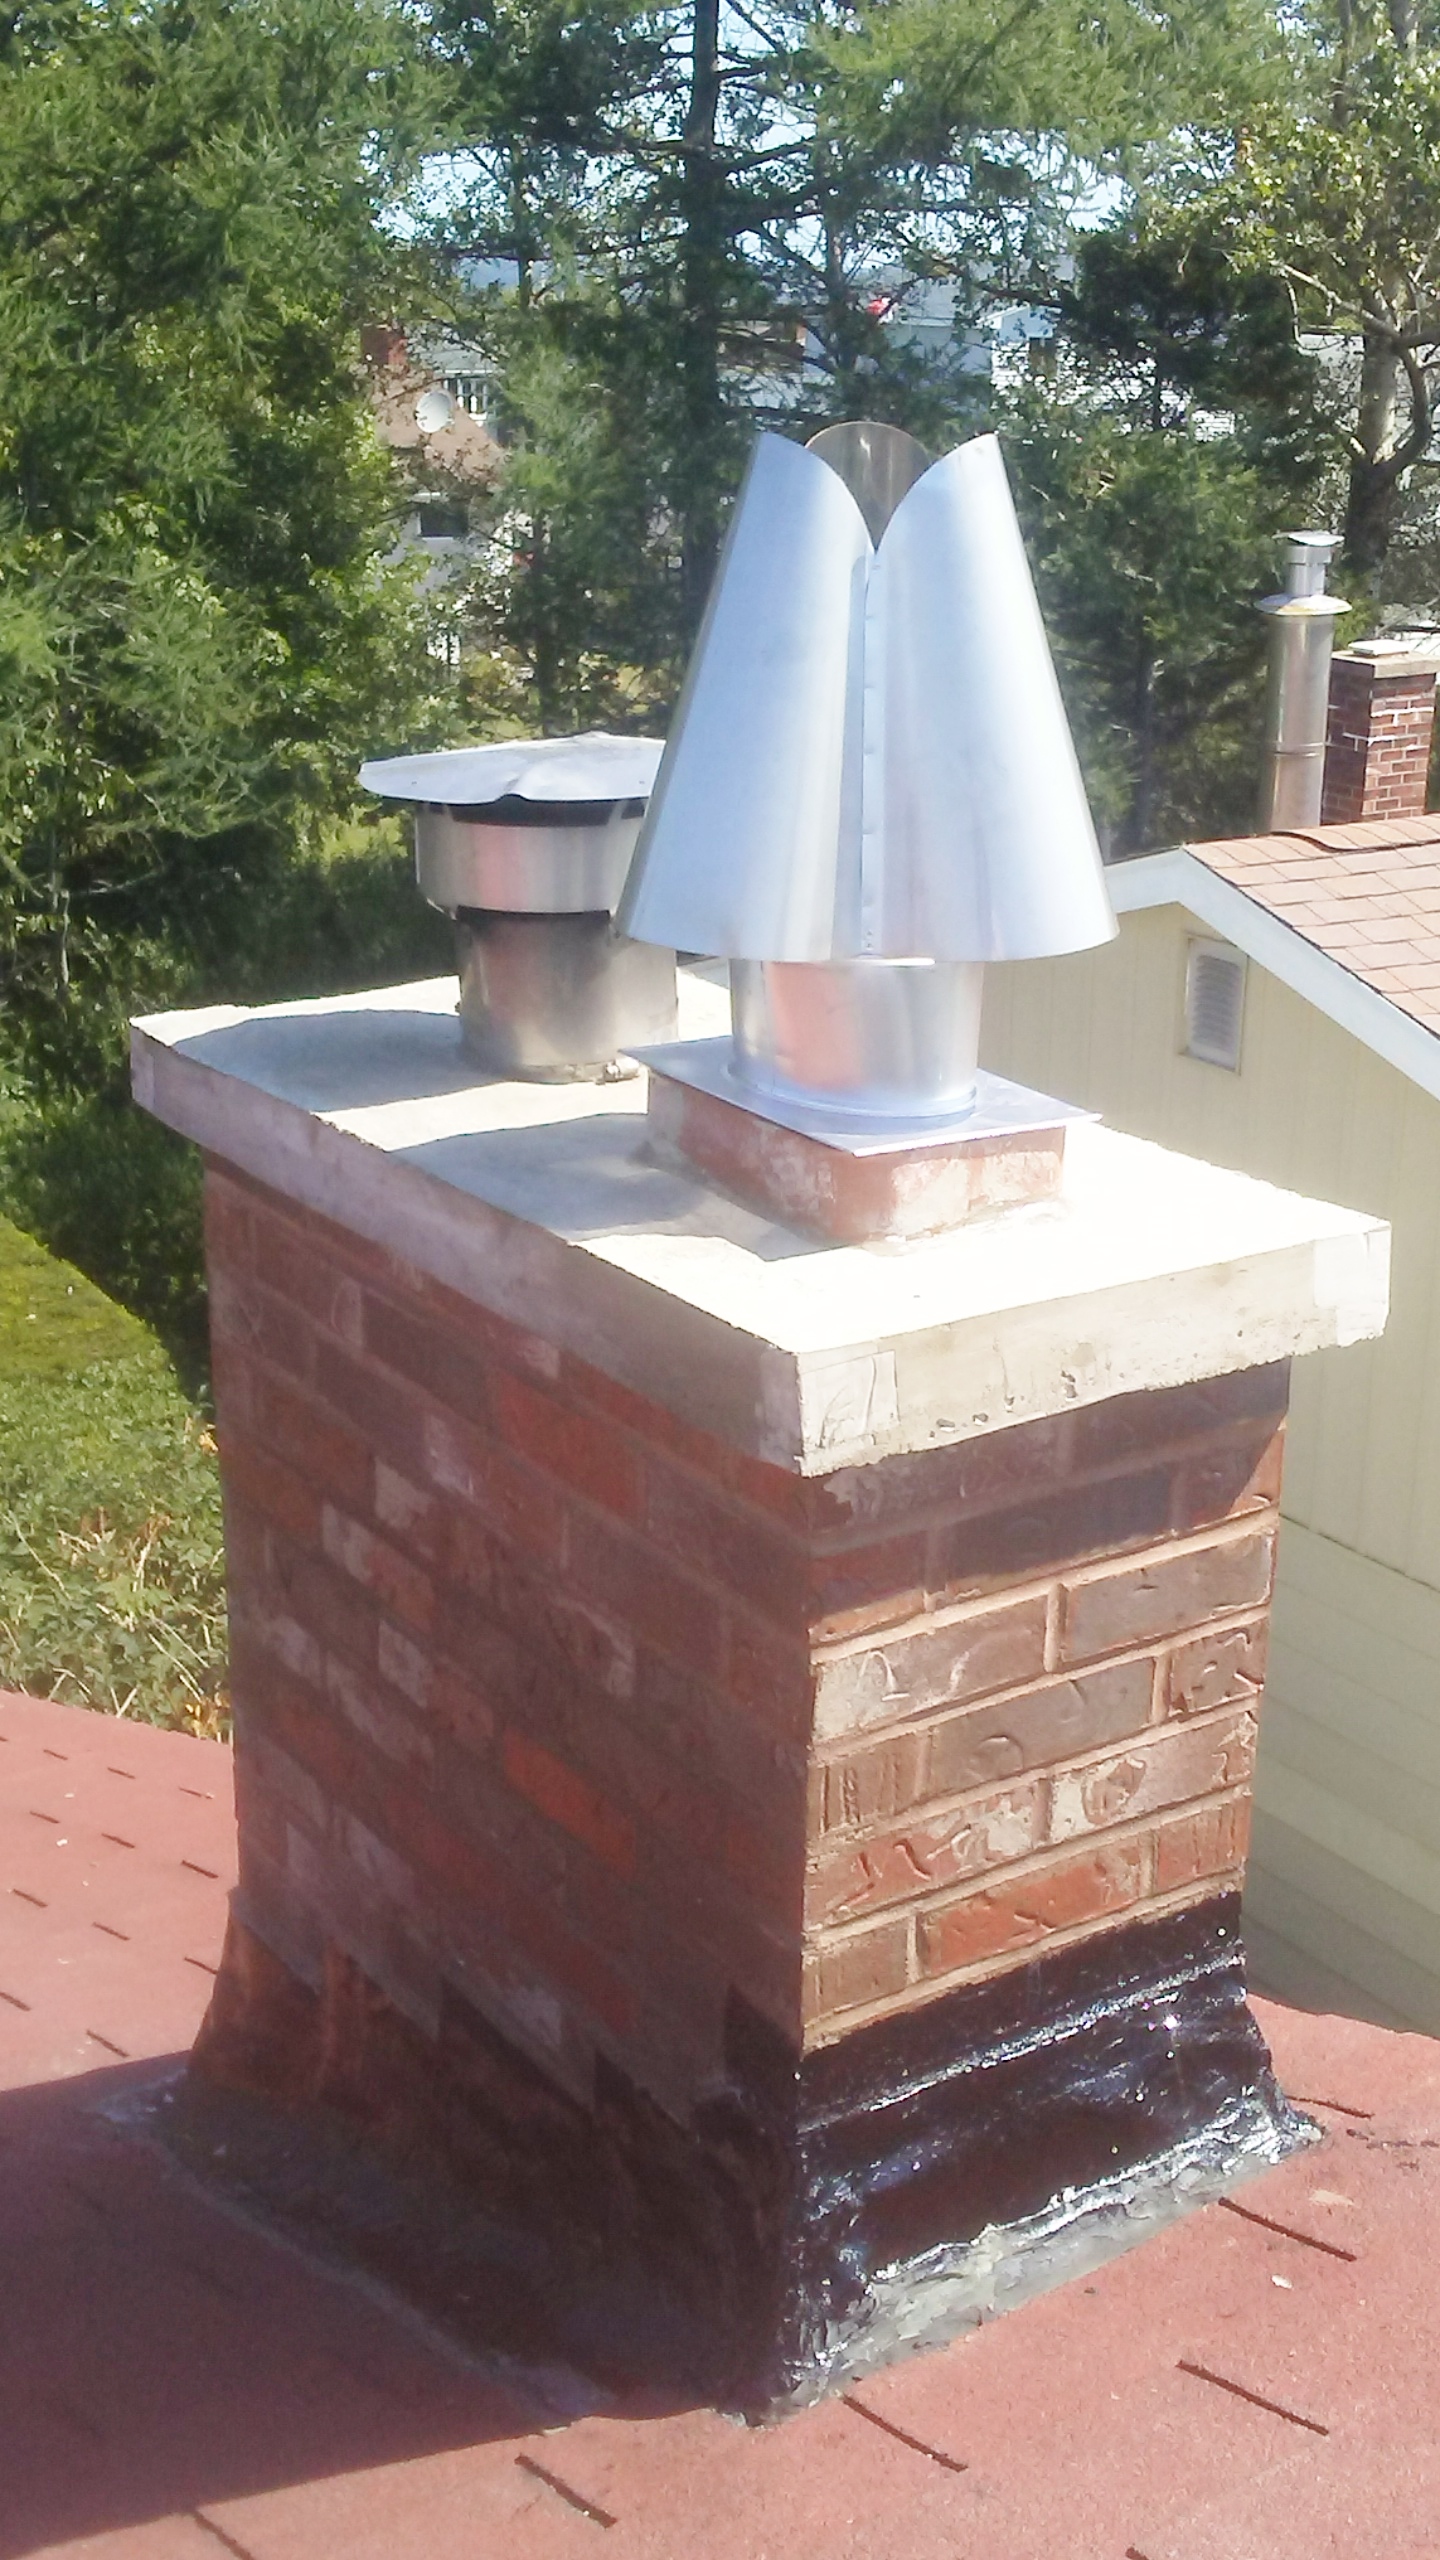 image of chimney cap or crown-chimney cap or crown services completed in the Halifax-Dartmouth Regional Municipality by Pro Chimney Services based in Halifax, NS servicing all of the Halifax-Dartmouth Regional Municipality, Bedford, Sackville, Mount Uniacke, Hantsport, Windsor, Wolfville, Kentville, Chester Basin, Mahone Bay, Lunenburg, Bridgewater, Liverpool, Fall River, Wellington, Enfield, Elmsdale, Brookfield, Truro, Musquodoboit Harbour & surrounding areas.